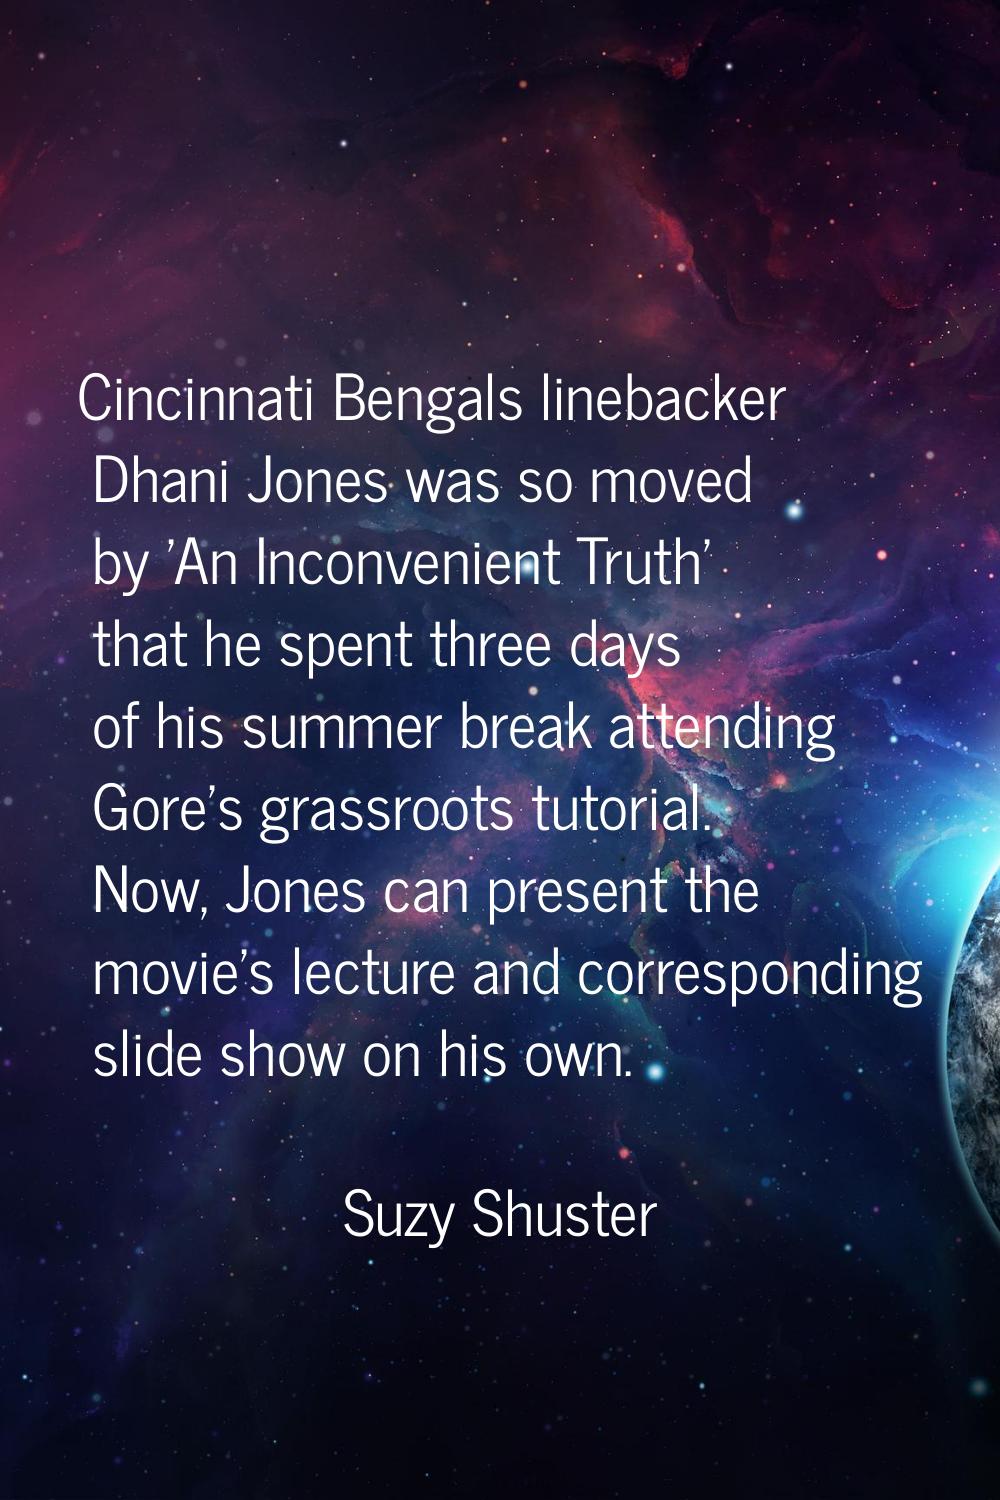 Cincinnati Bengals linebacker Dhani Jones was so moved by 'An Inconvenient Truth' that he spent thr